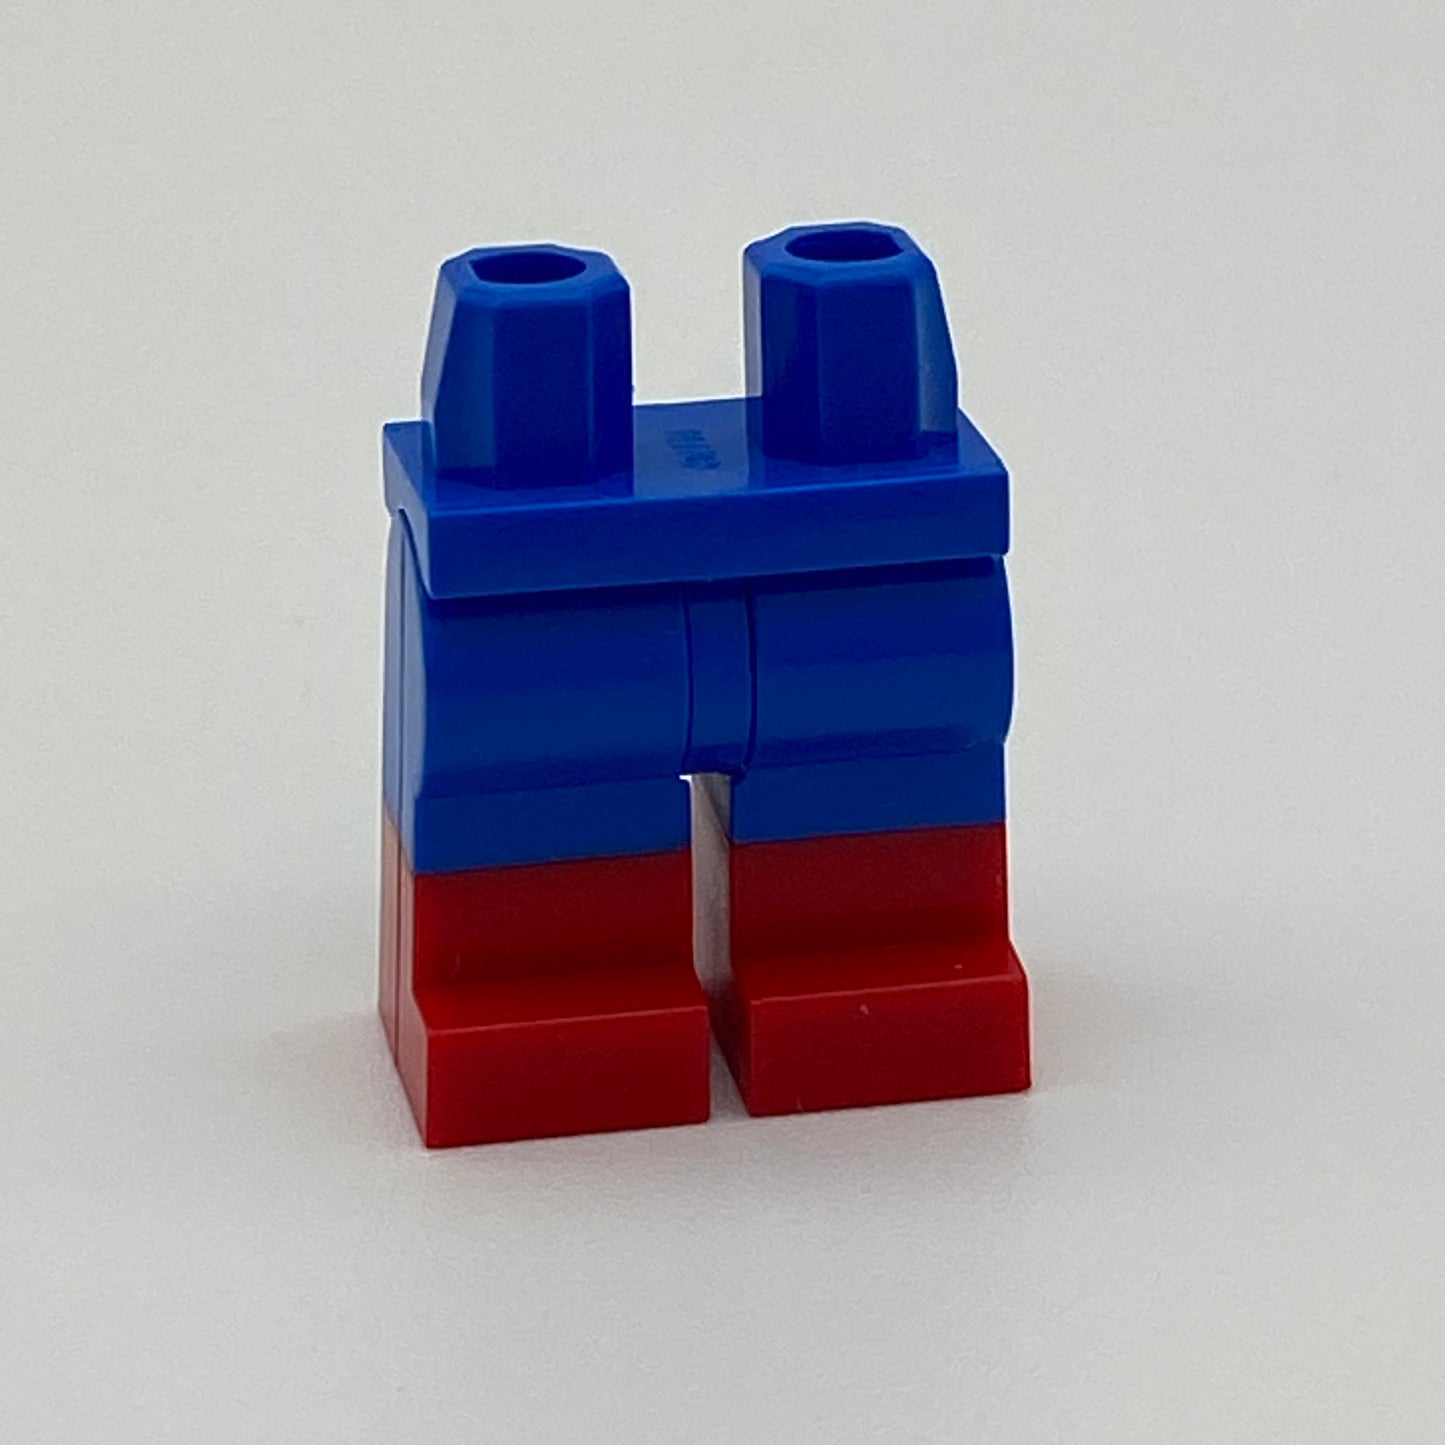 Dual Molded Legs - Blue and Red